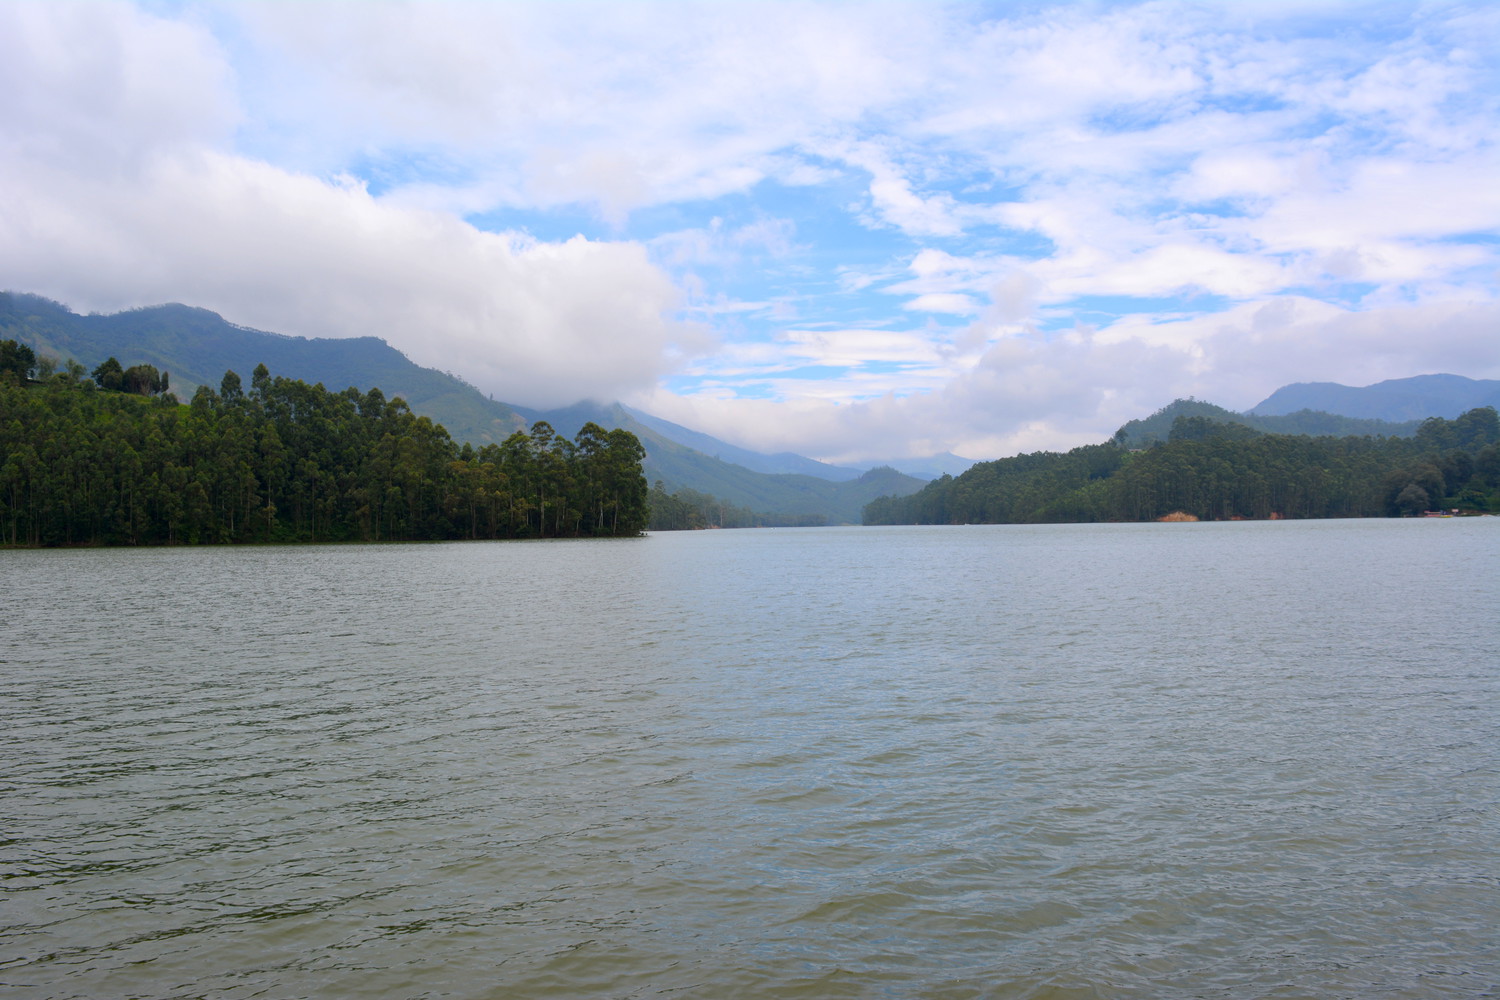 A large reservoir full of water surrounded by trees, hills, and sky in the background